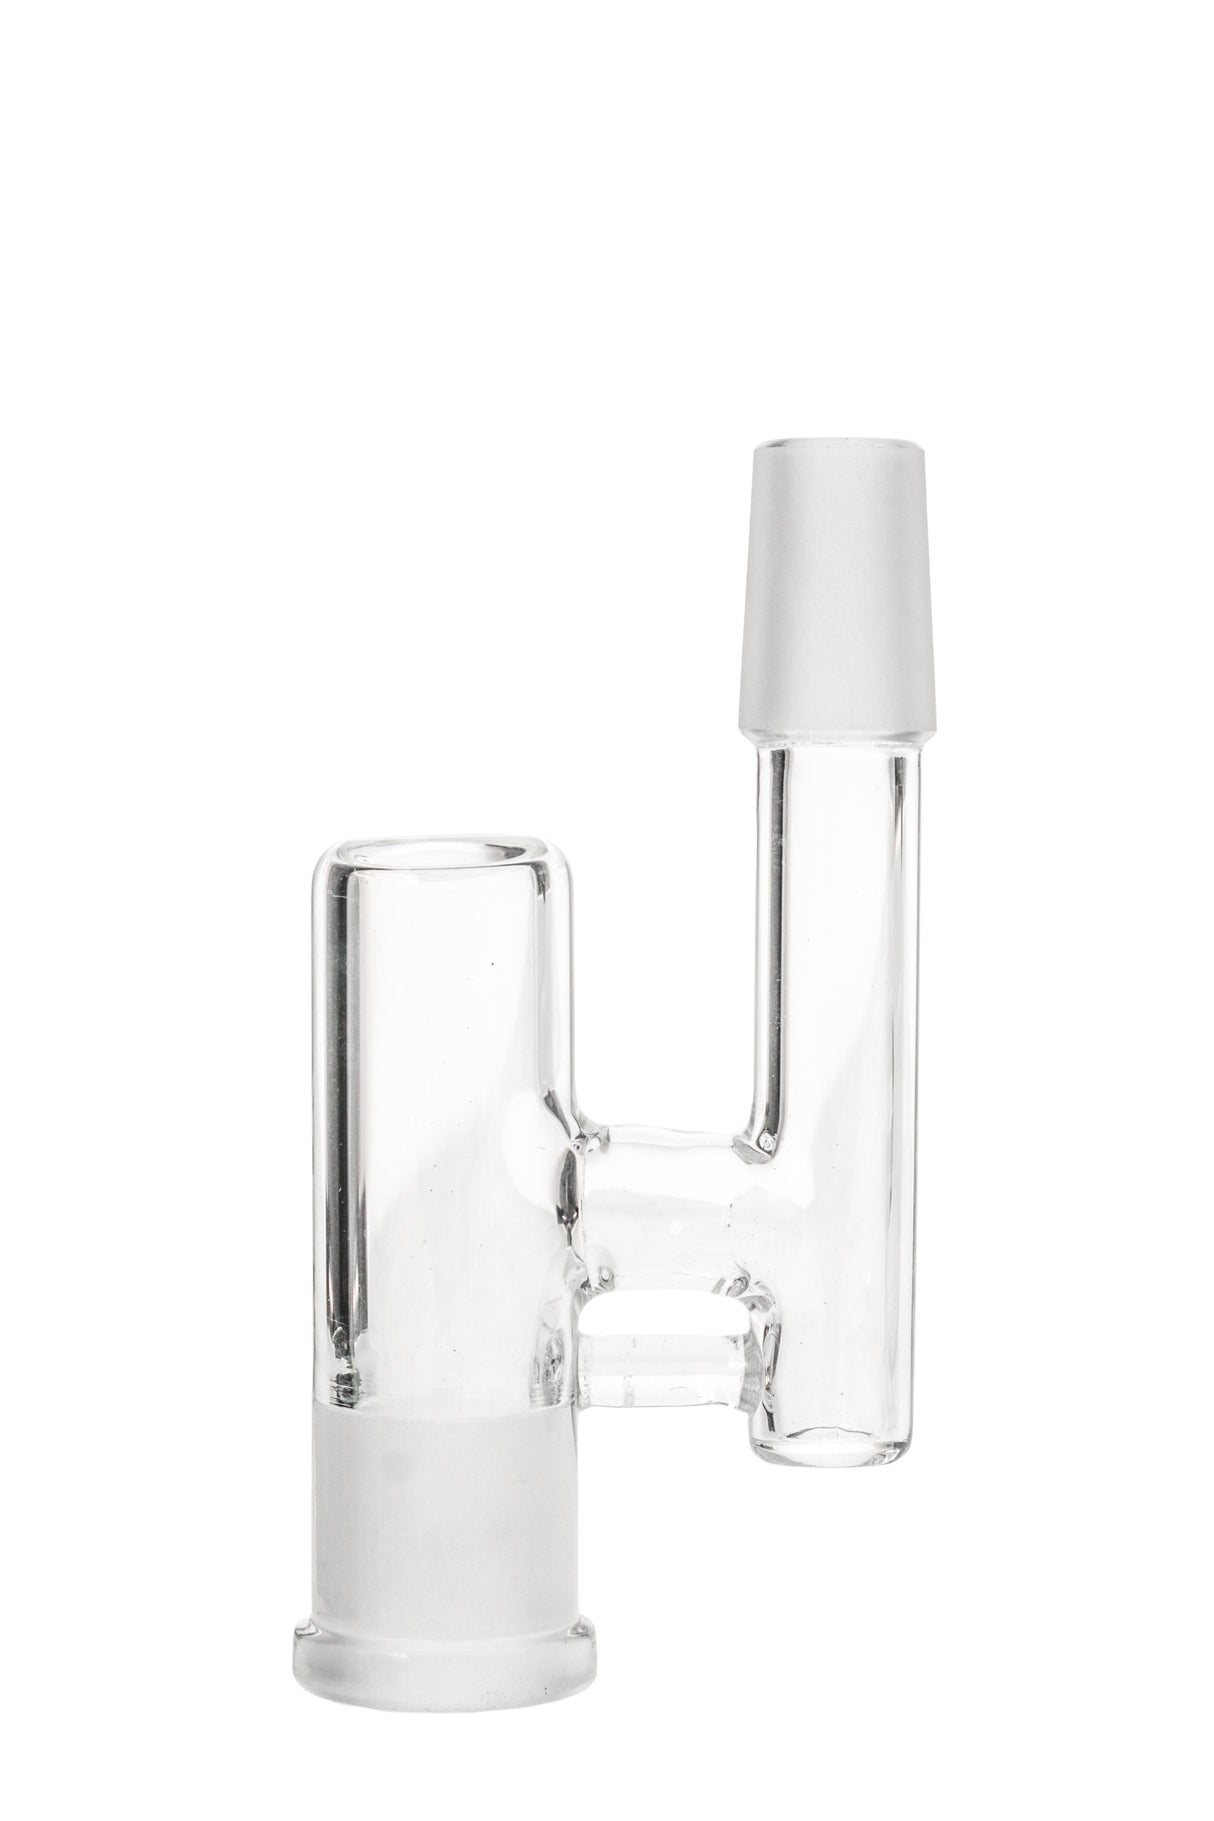 TAG - Universal Fit Reclaim Catcher Adapter, clear glass, side view, for bong customization